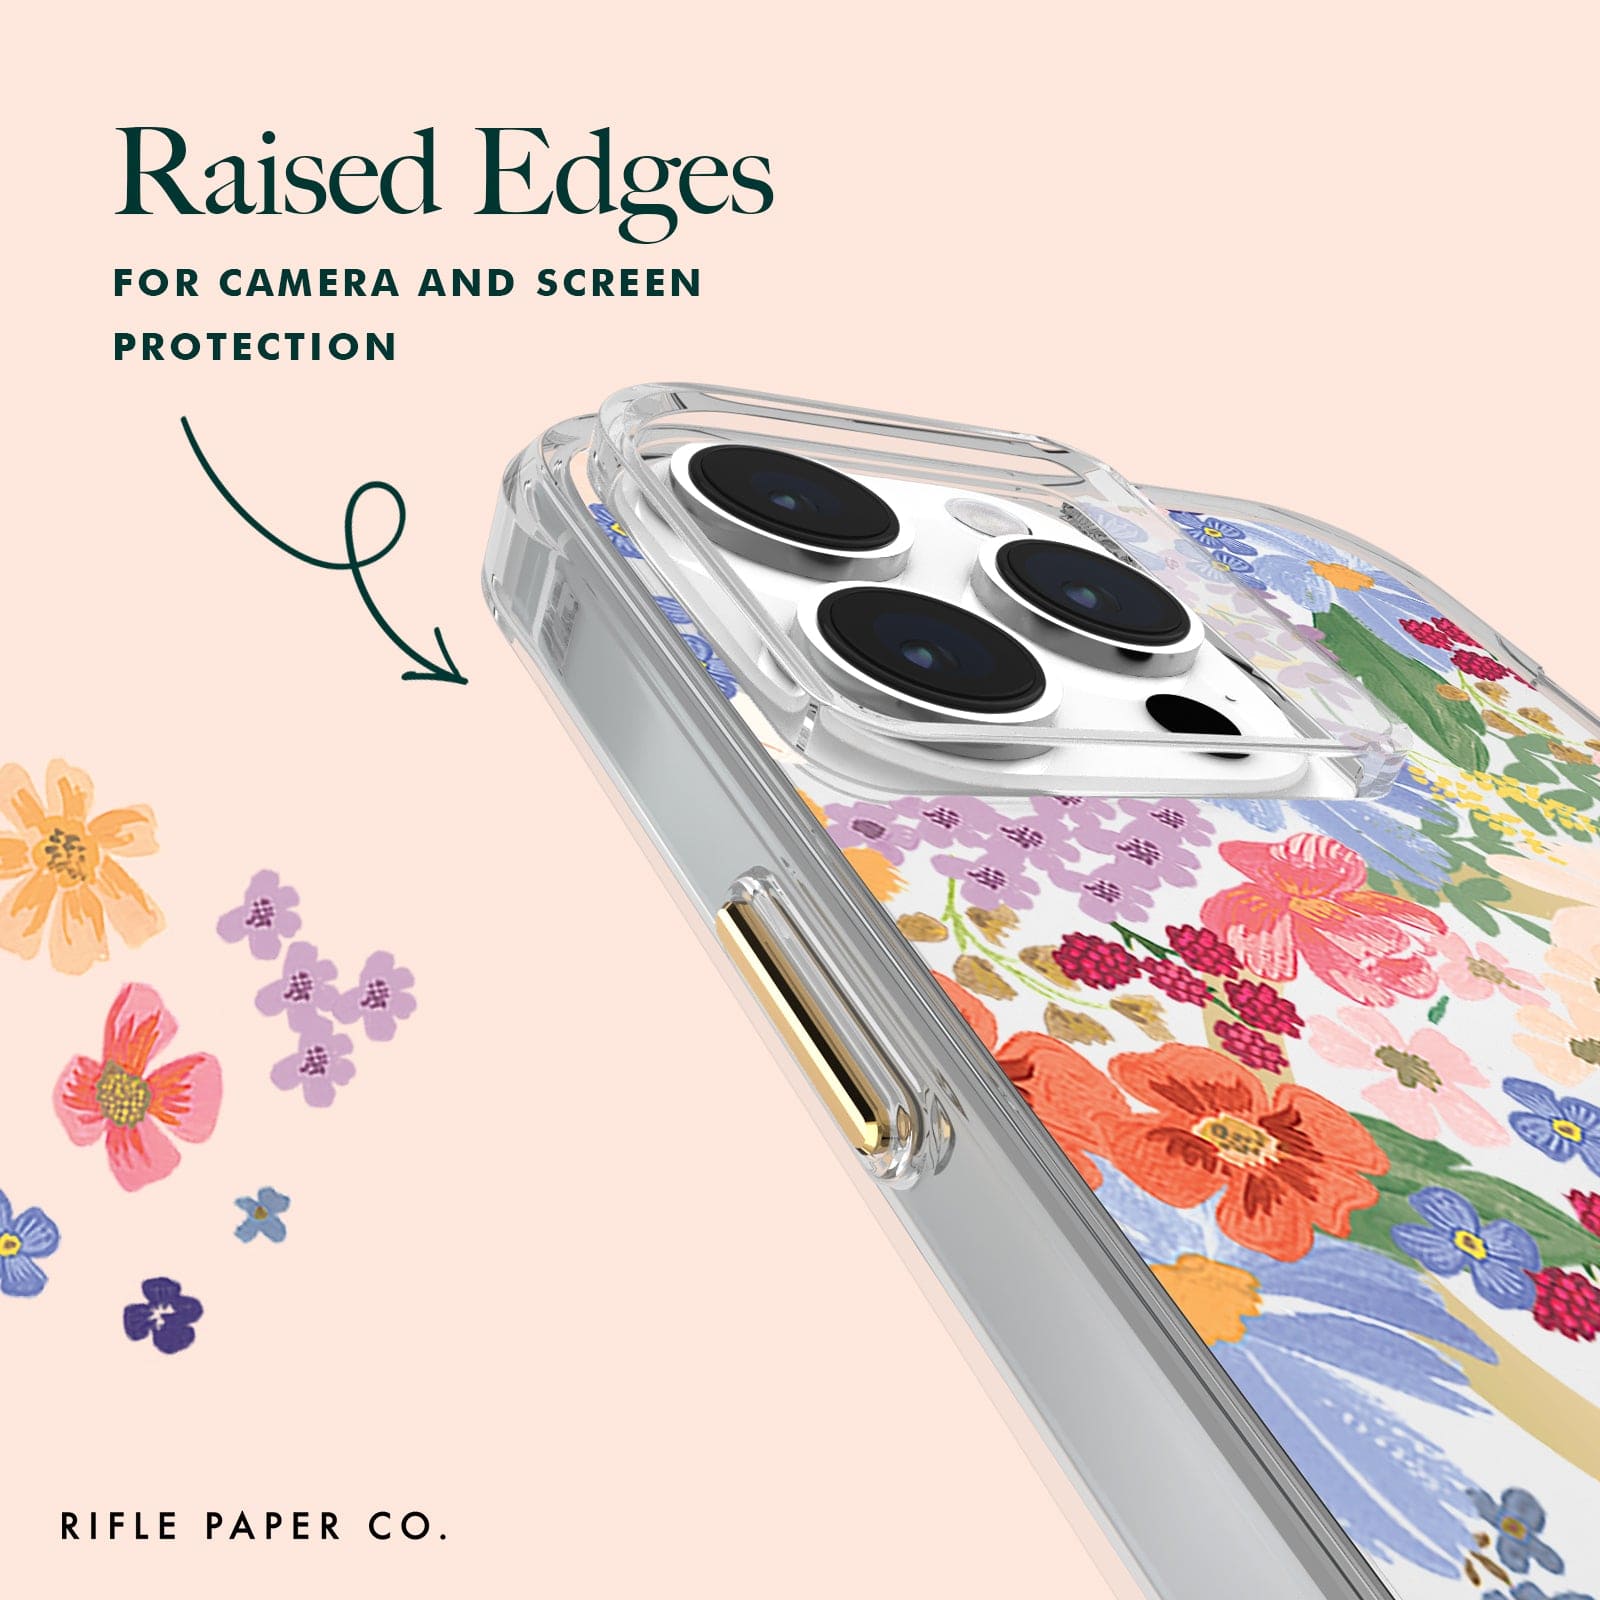 RAISED EDGES FOR CAMERA AND SCREEN PROTECTION.